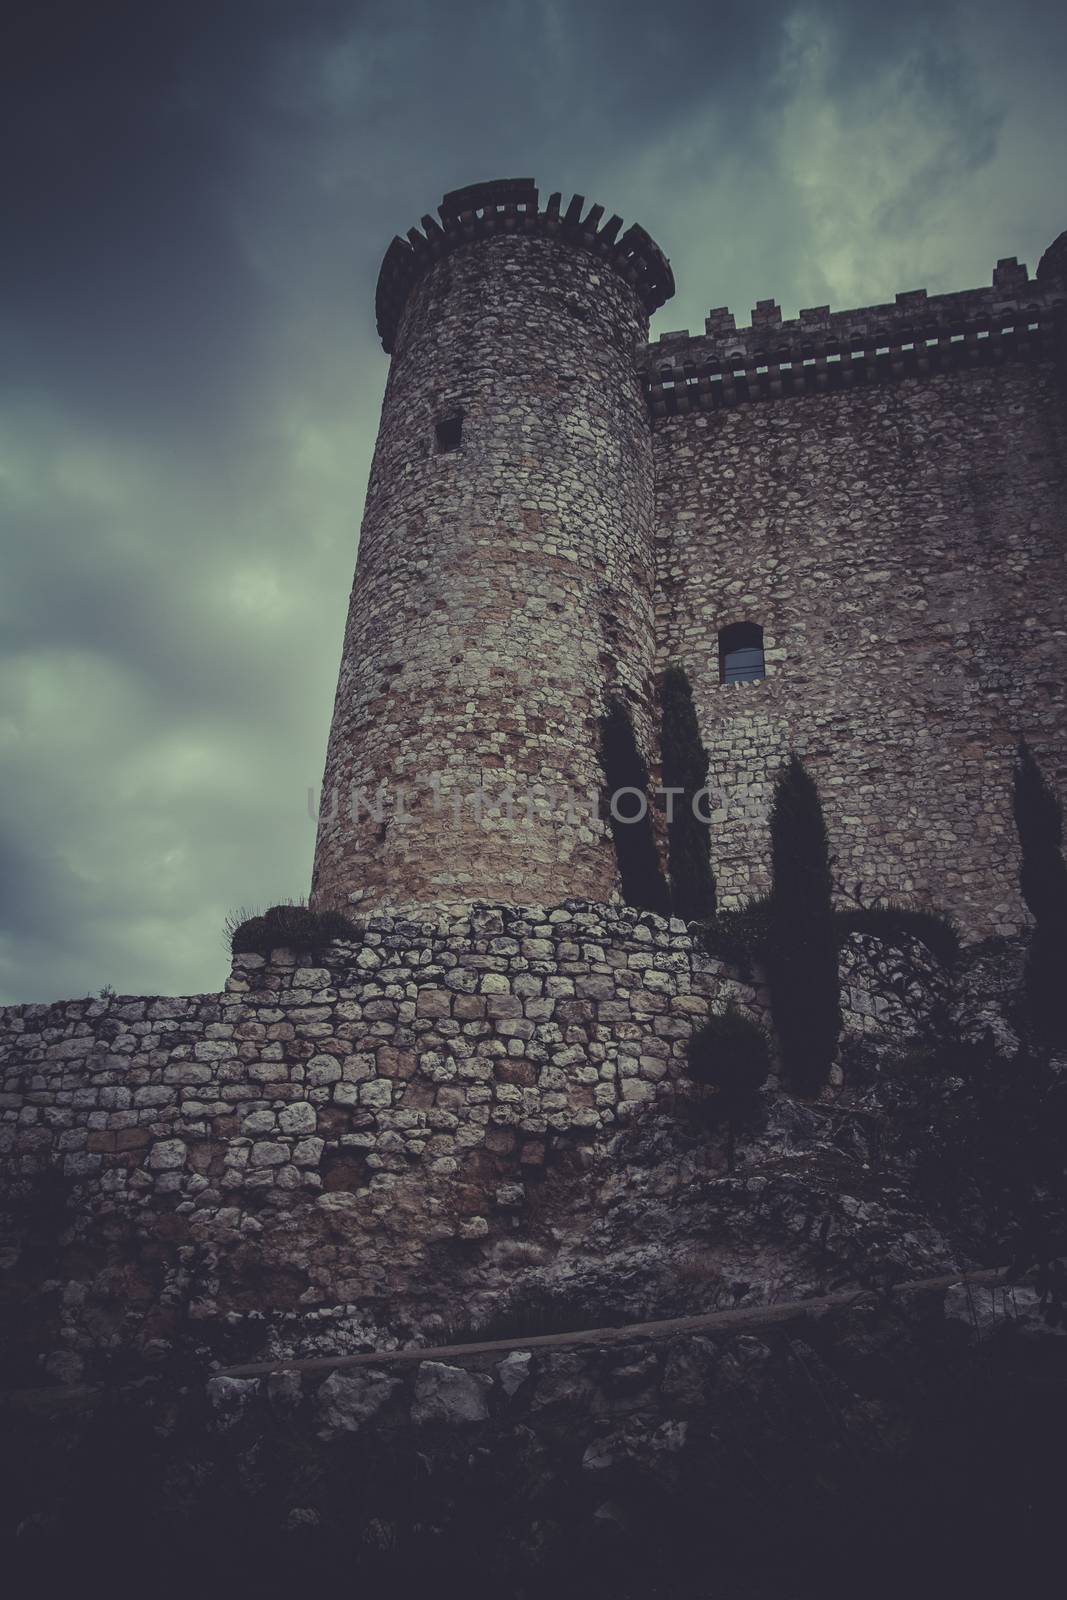 Tower, Medieval castle, spain architecture by FernandoCortes